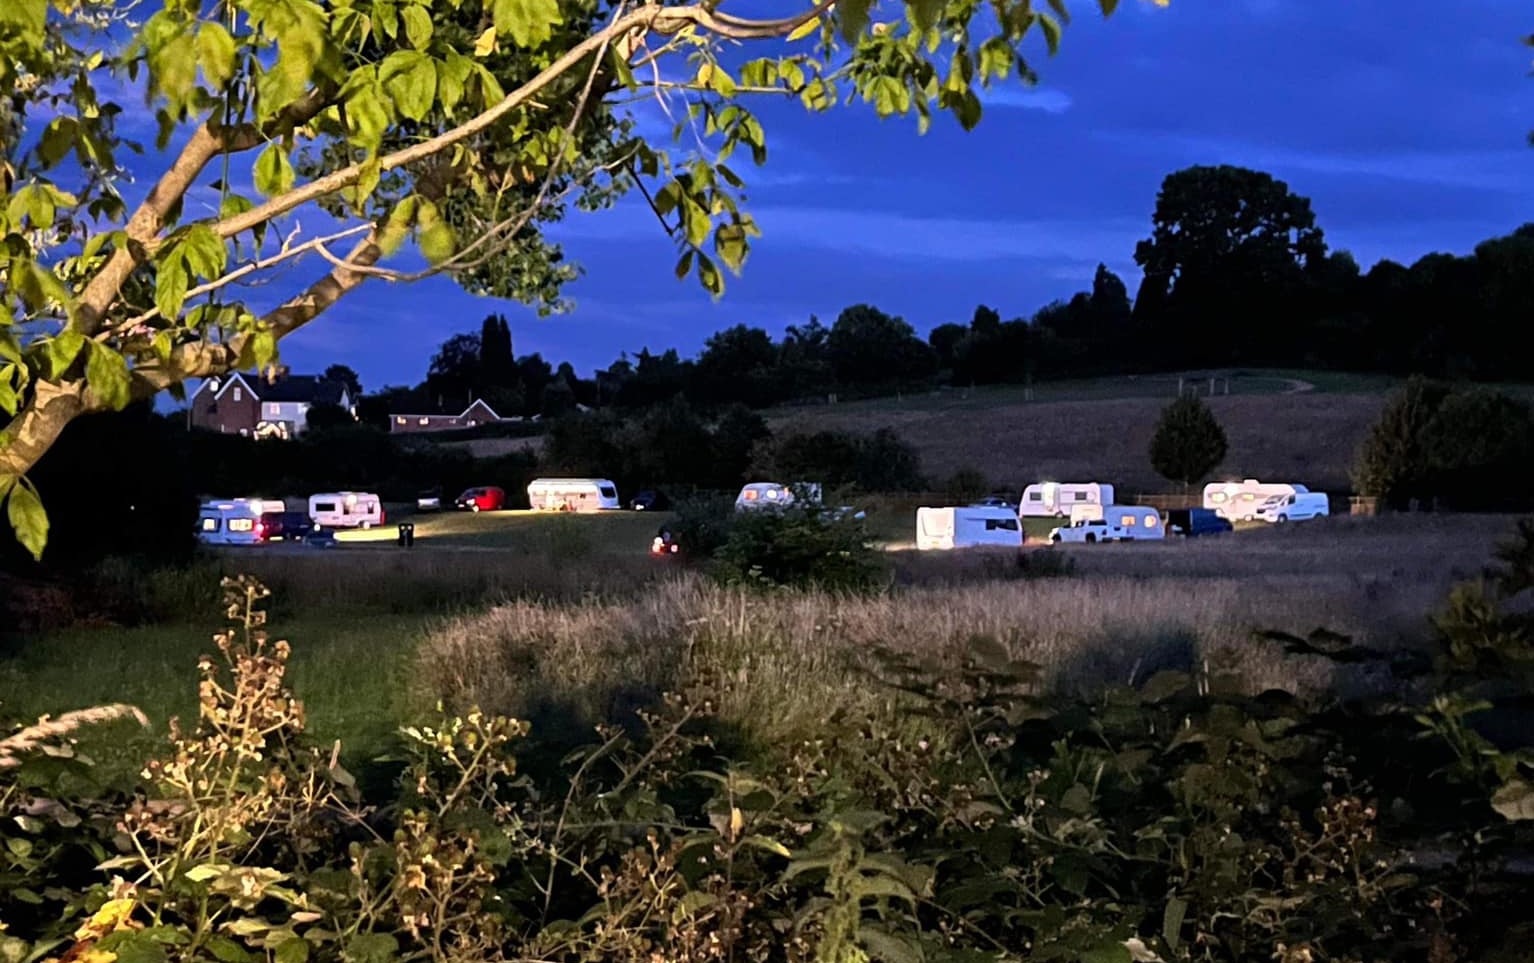 The travellers turned up on Wednesday evening, but police say officers could not find evidence of criminal damage